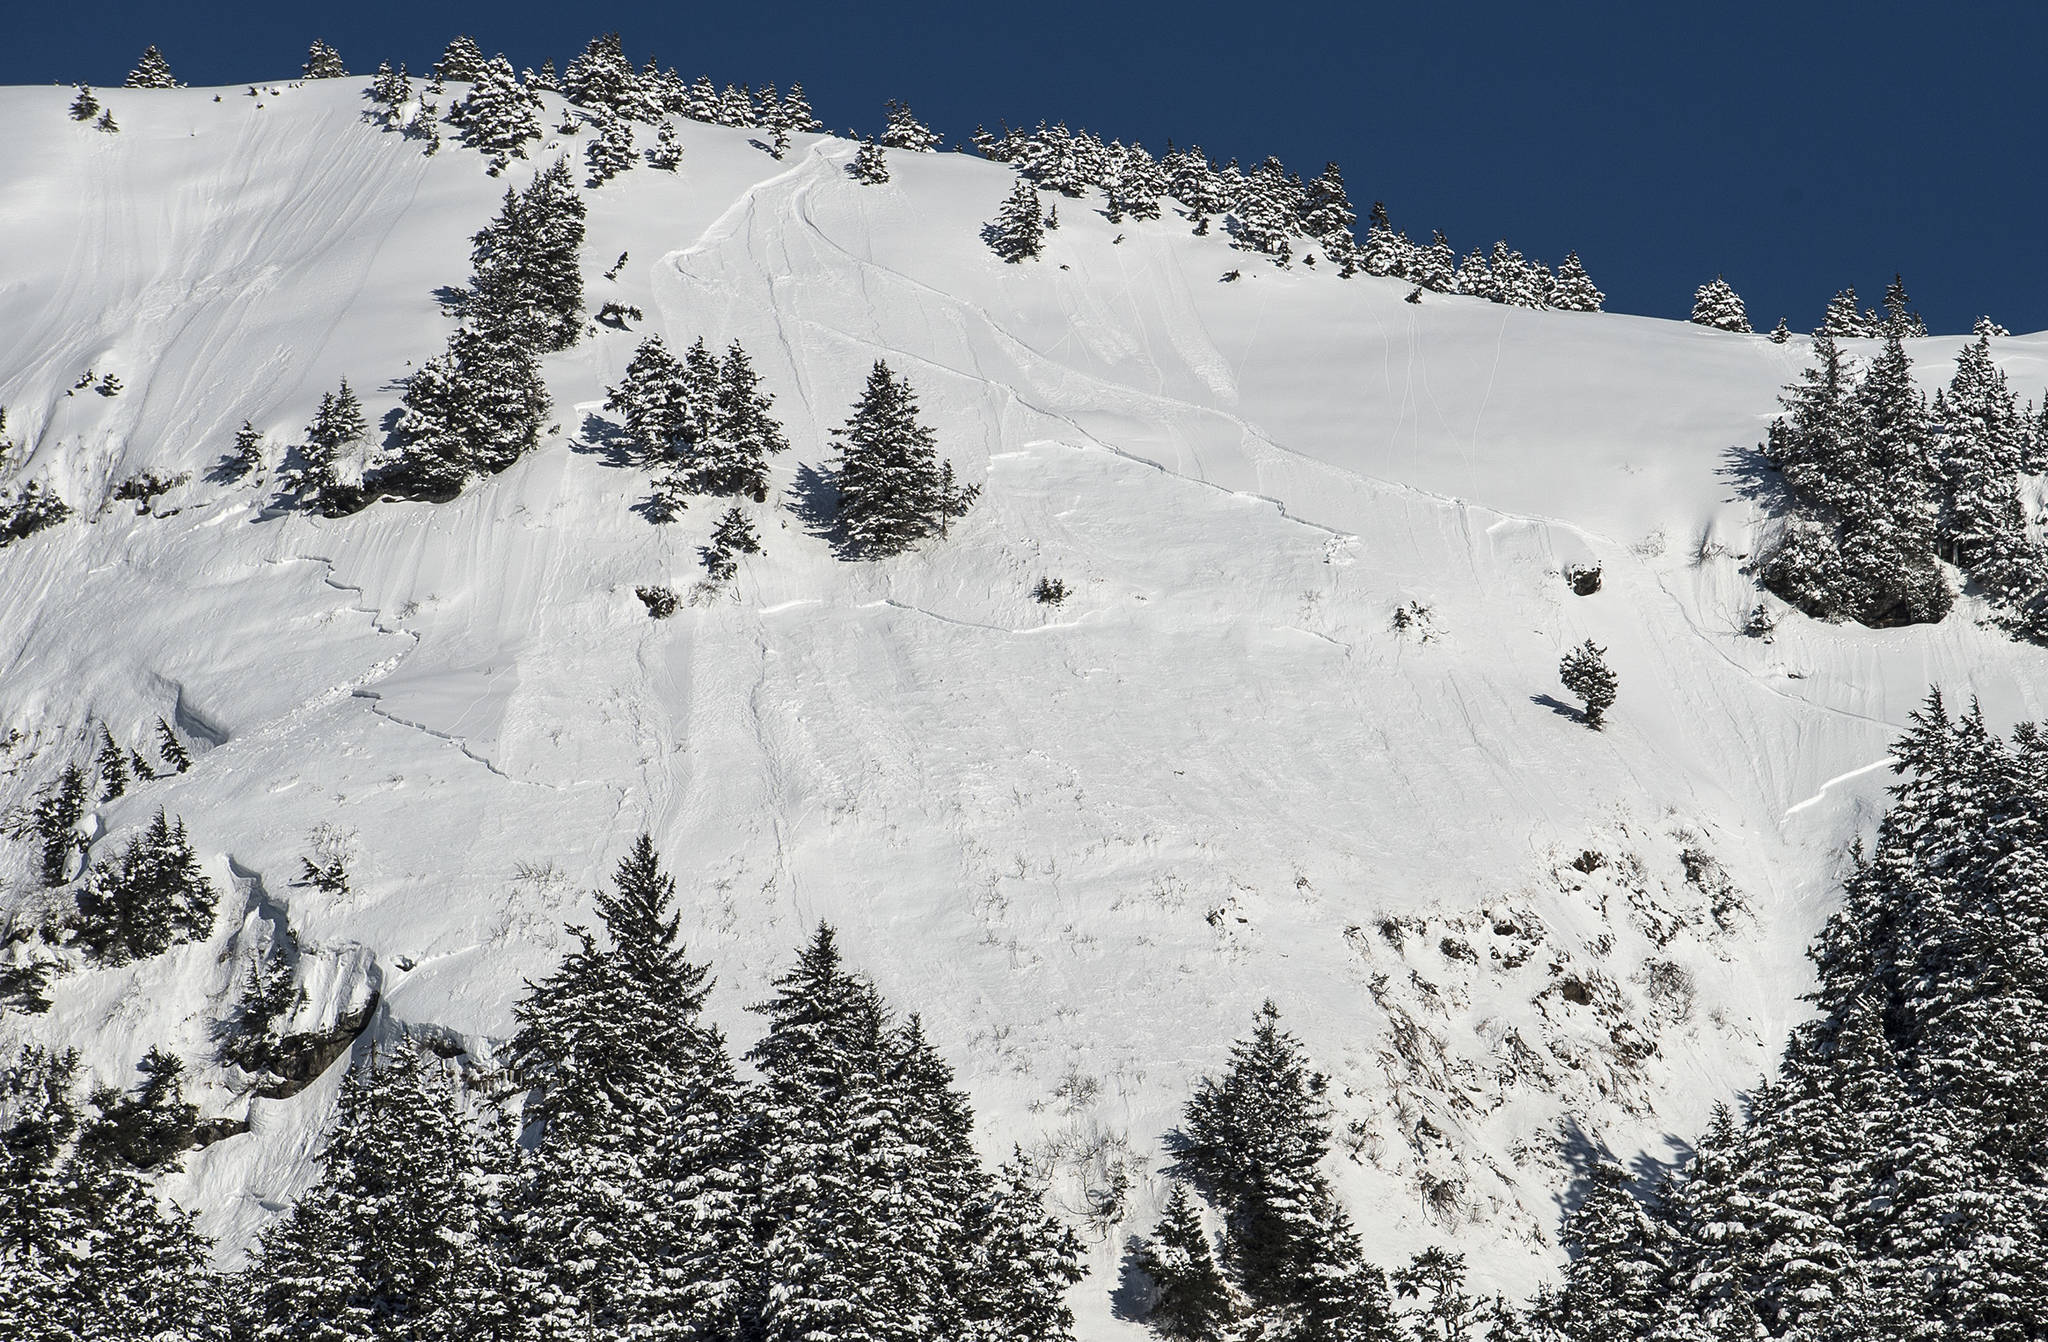 An area known as Showboat shows where a skier triggered an avalanche on Saturday, March 4, 2017. He was taken to Bartlett Regional Hospital. The area is outside of the Eaglecrest Ski Area boundary.